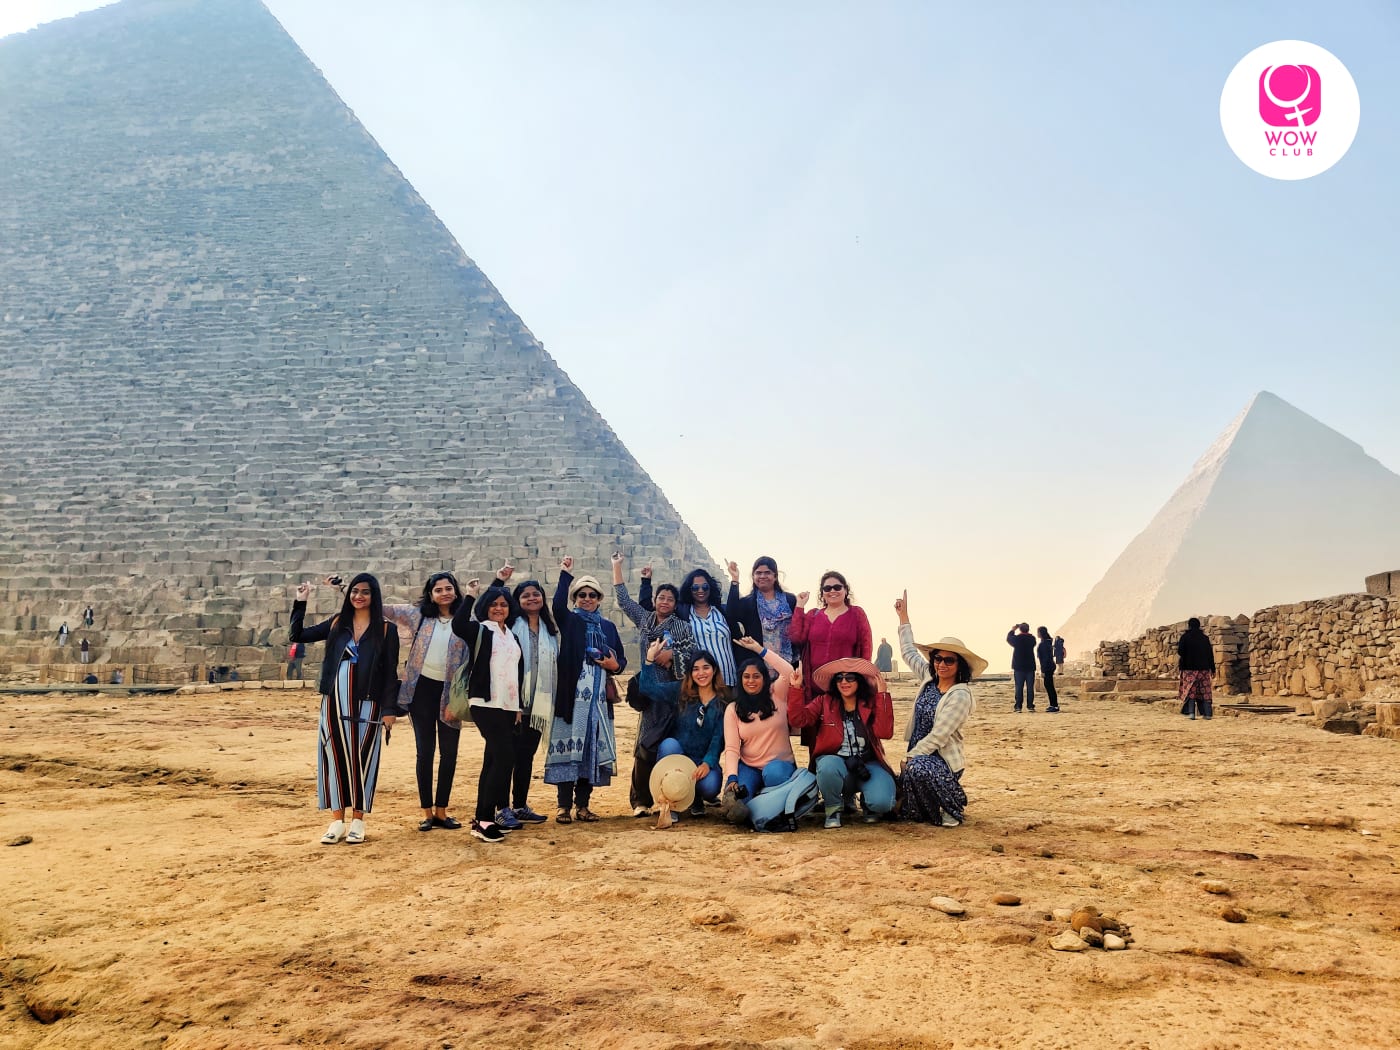 The Ultimate Egypt Travel Guide for Women